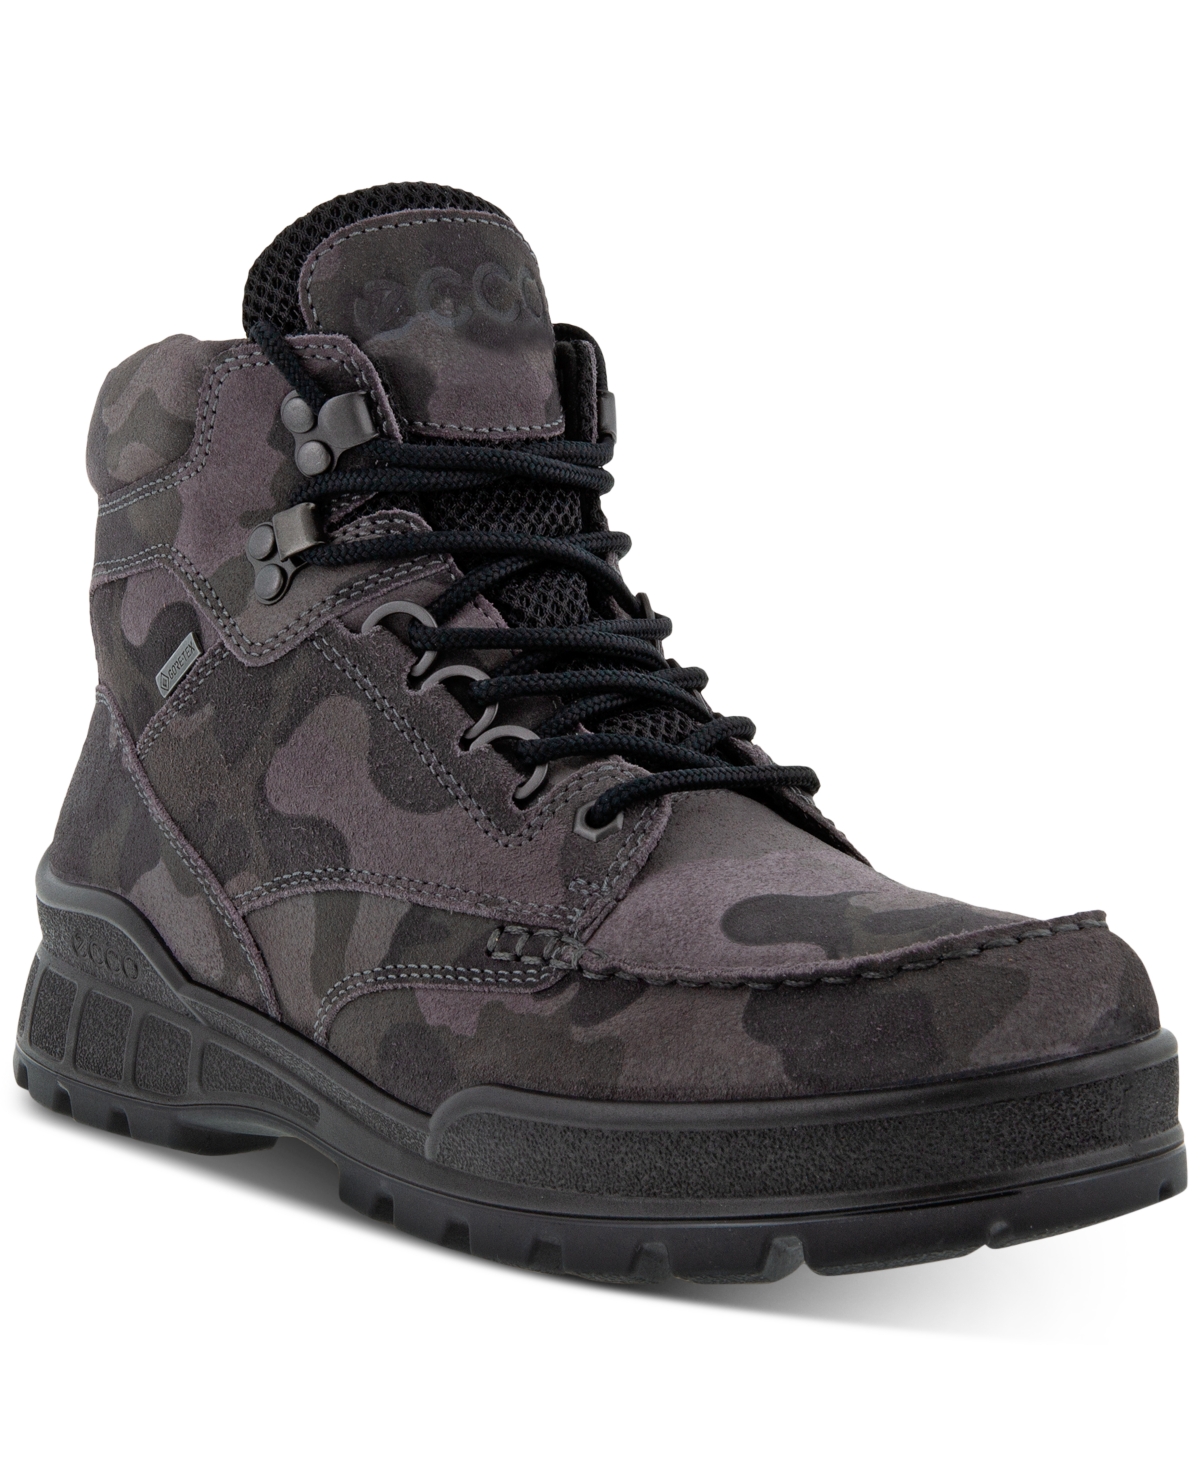 UPC 194890254886 product image for Ecco Men's Track 25 Mid Camouflage Waterproof Lace-Up Boots Men's Shoes | upcitemdb.com